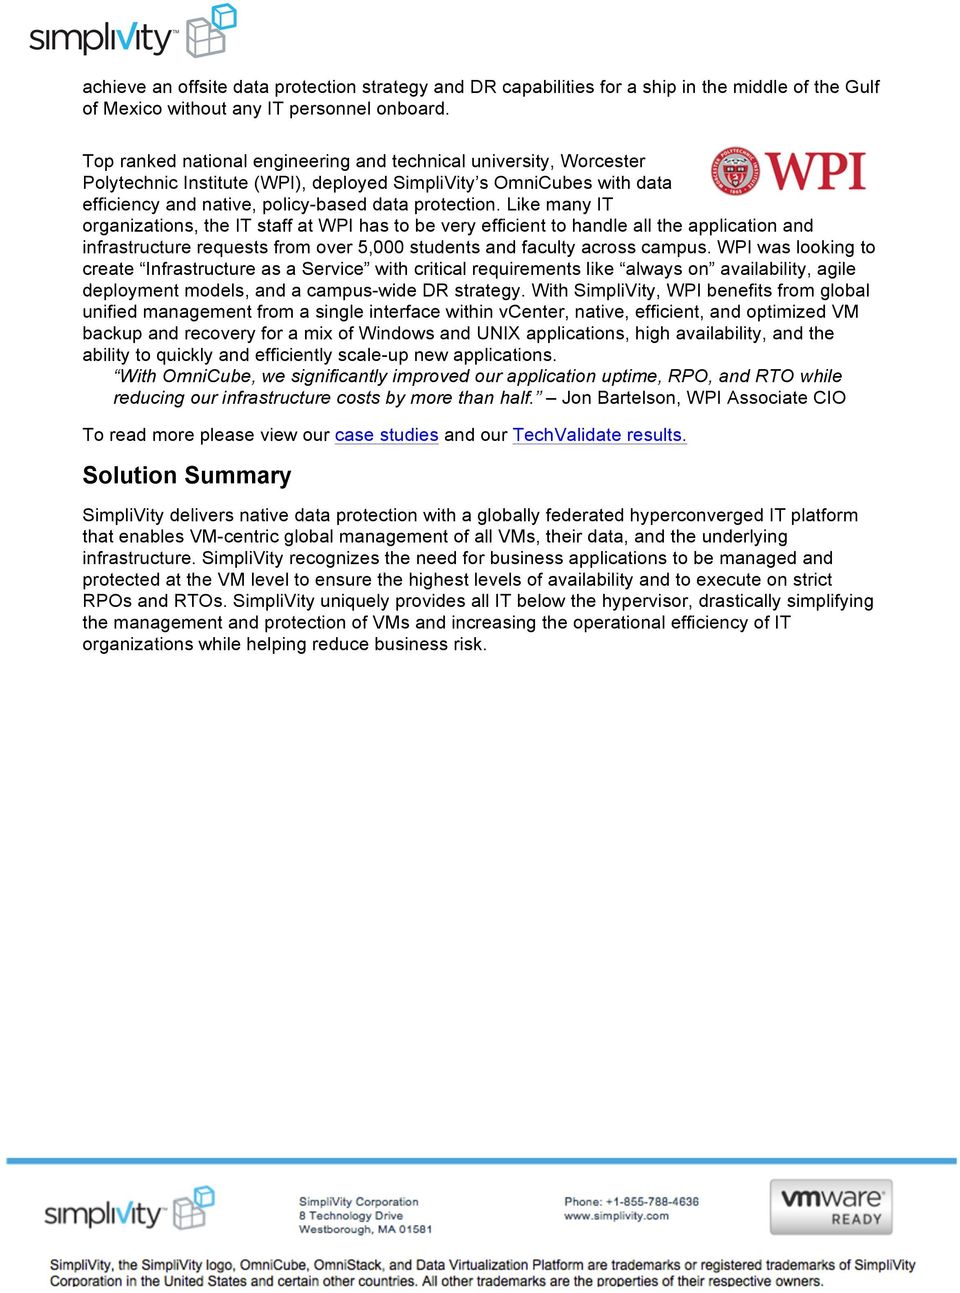 Like many IT organizations, the IT staff at WPI has to be very efficient to handle all the application and infrastructure requests from over 5,000 students and faculty across campus.